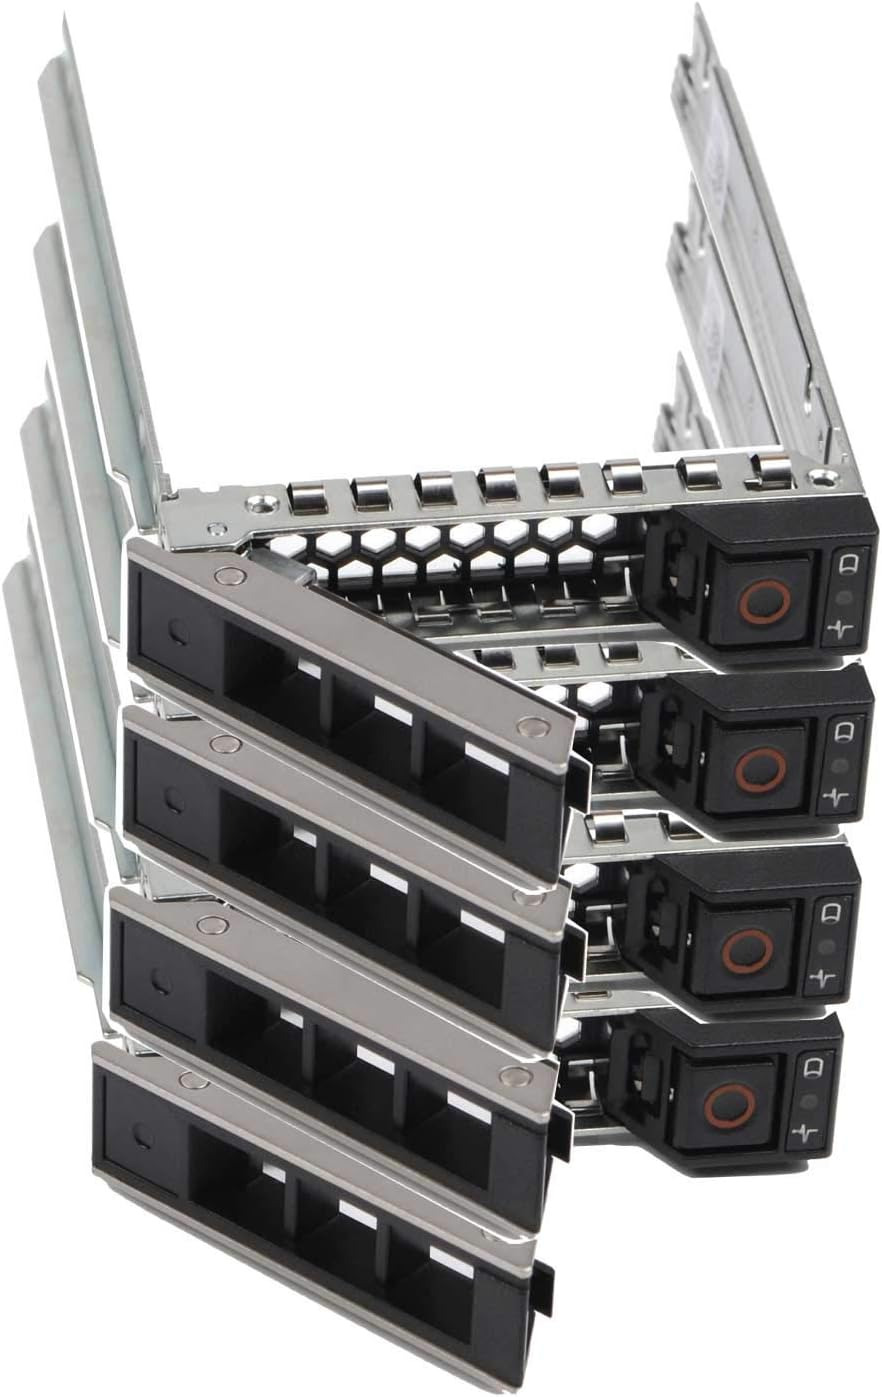 Pack-4 2.5 Inch Hard Drive Caddy 0DXD9H DXD9H Compatible for Dell Poweredge Ser